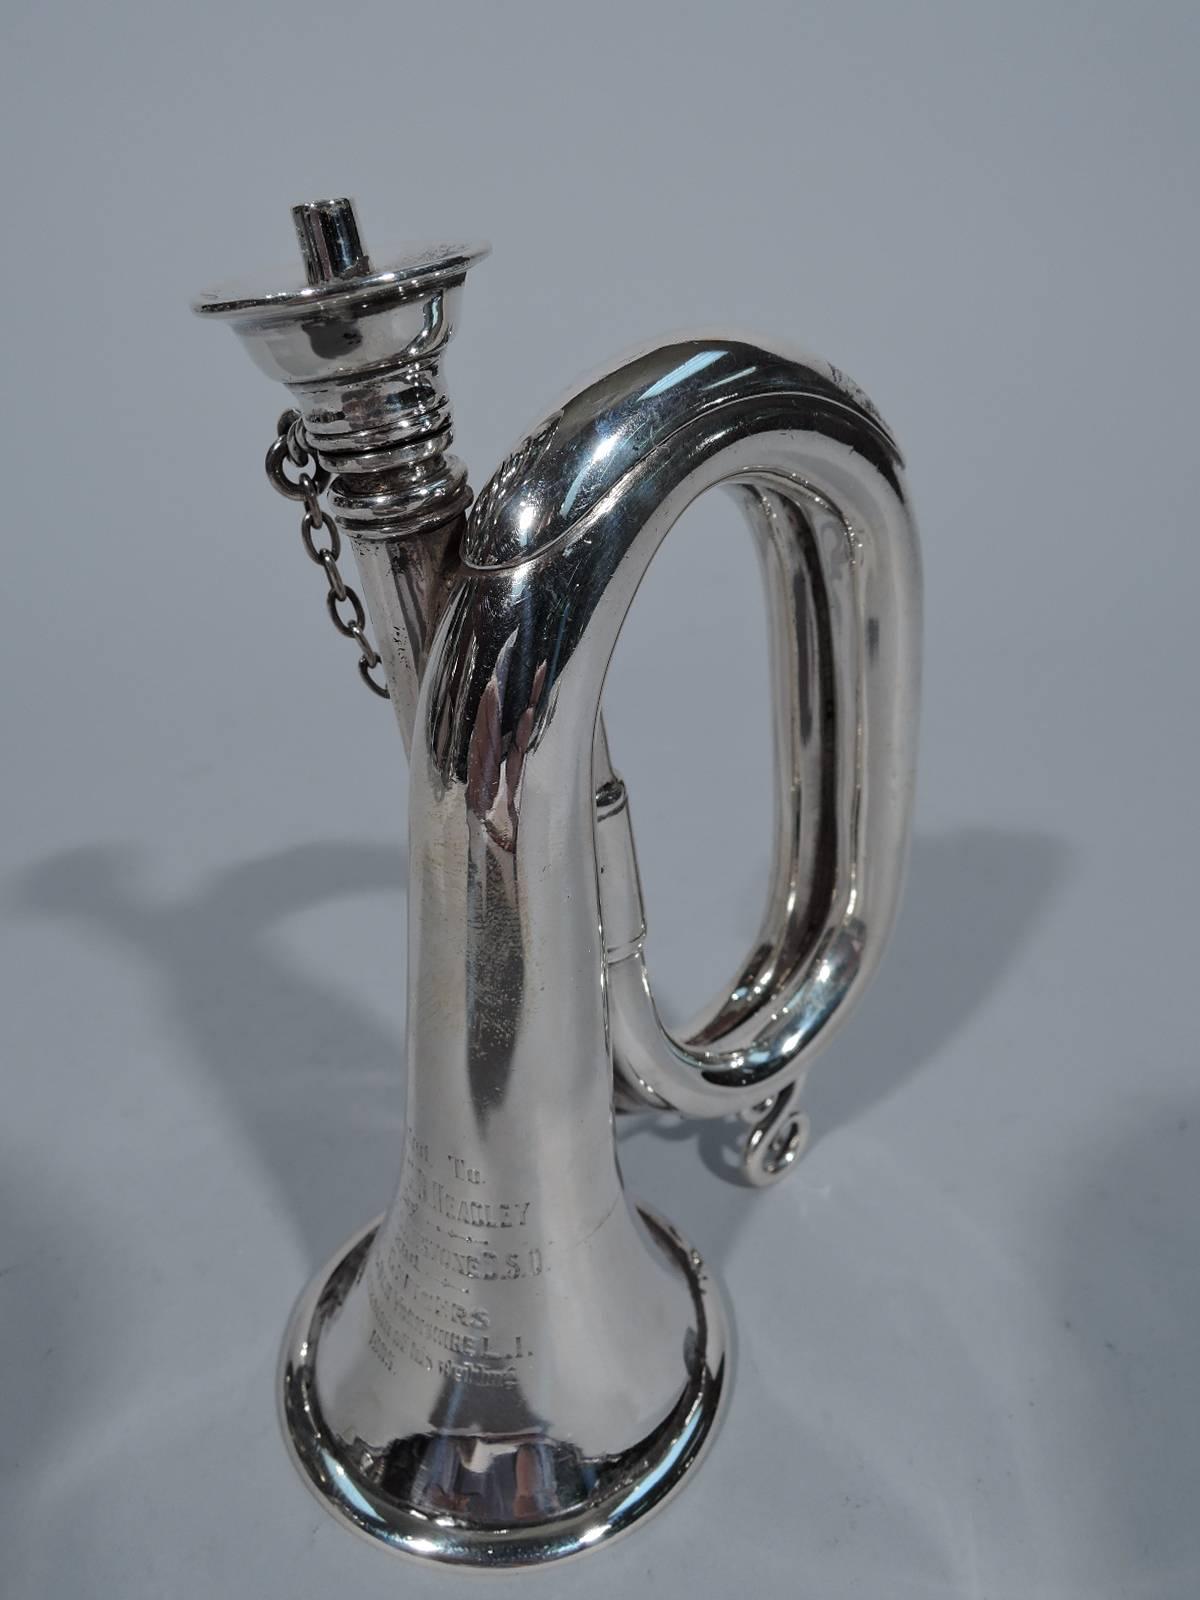 Edwardian sterling silver novelty cigar lighter. Made by in London in 1905. Bugle form with chained and detachable head. Engraved military inscription: Presented to Lieut. STGB Headley by Colonel Johnston DSO and the officers 3rd Kings Own Yorkshire